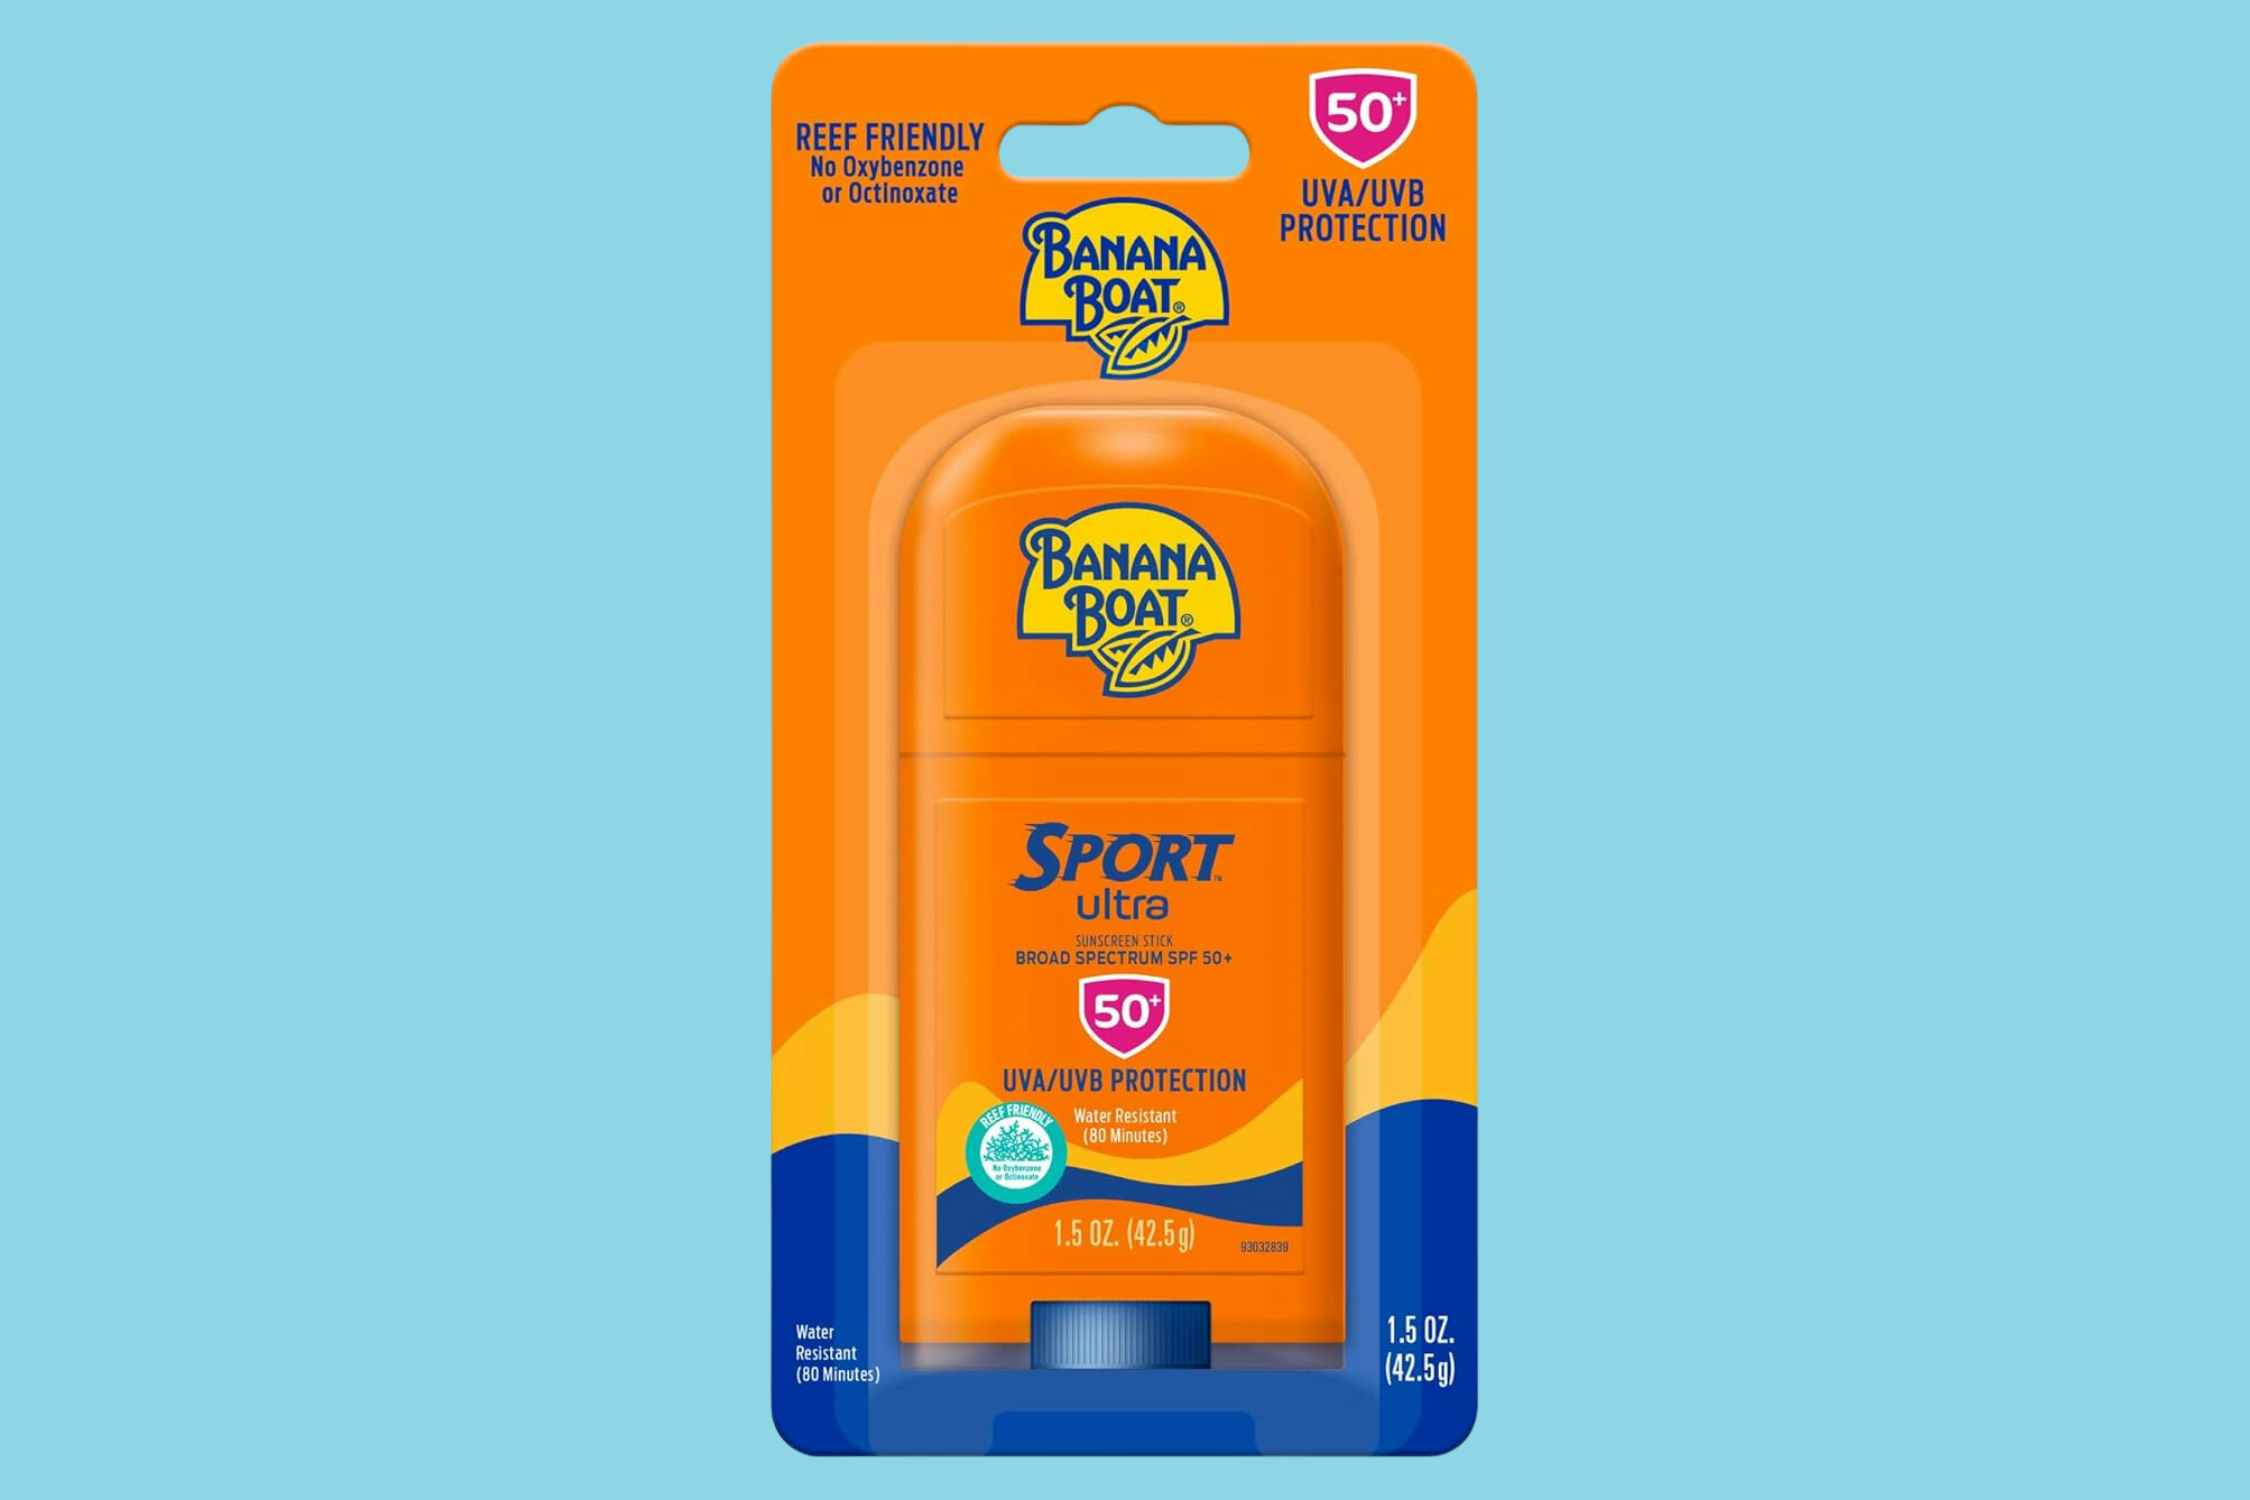 Banana Boat Sunscreen Stick, as Low as at $1.49 on Amazon (Reg. $12)